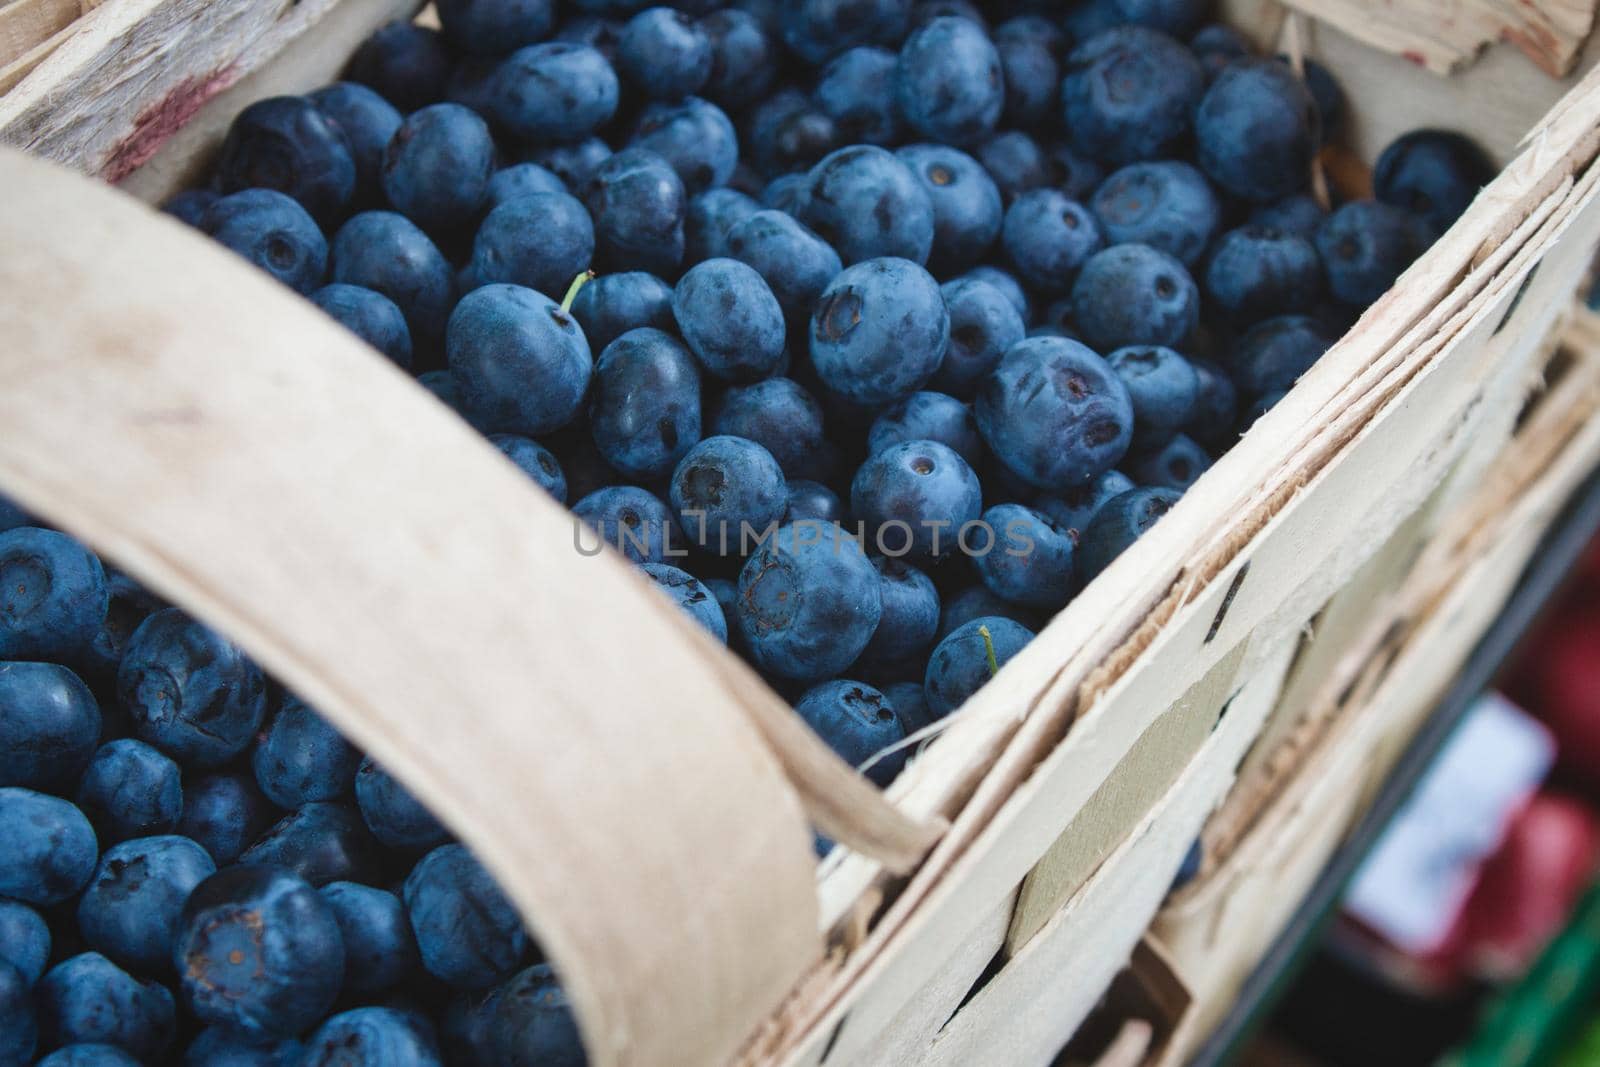 A basket full of fresh ripe blueberries by tennesseewitney